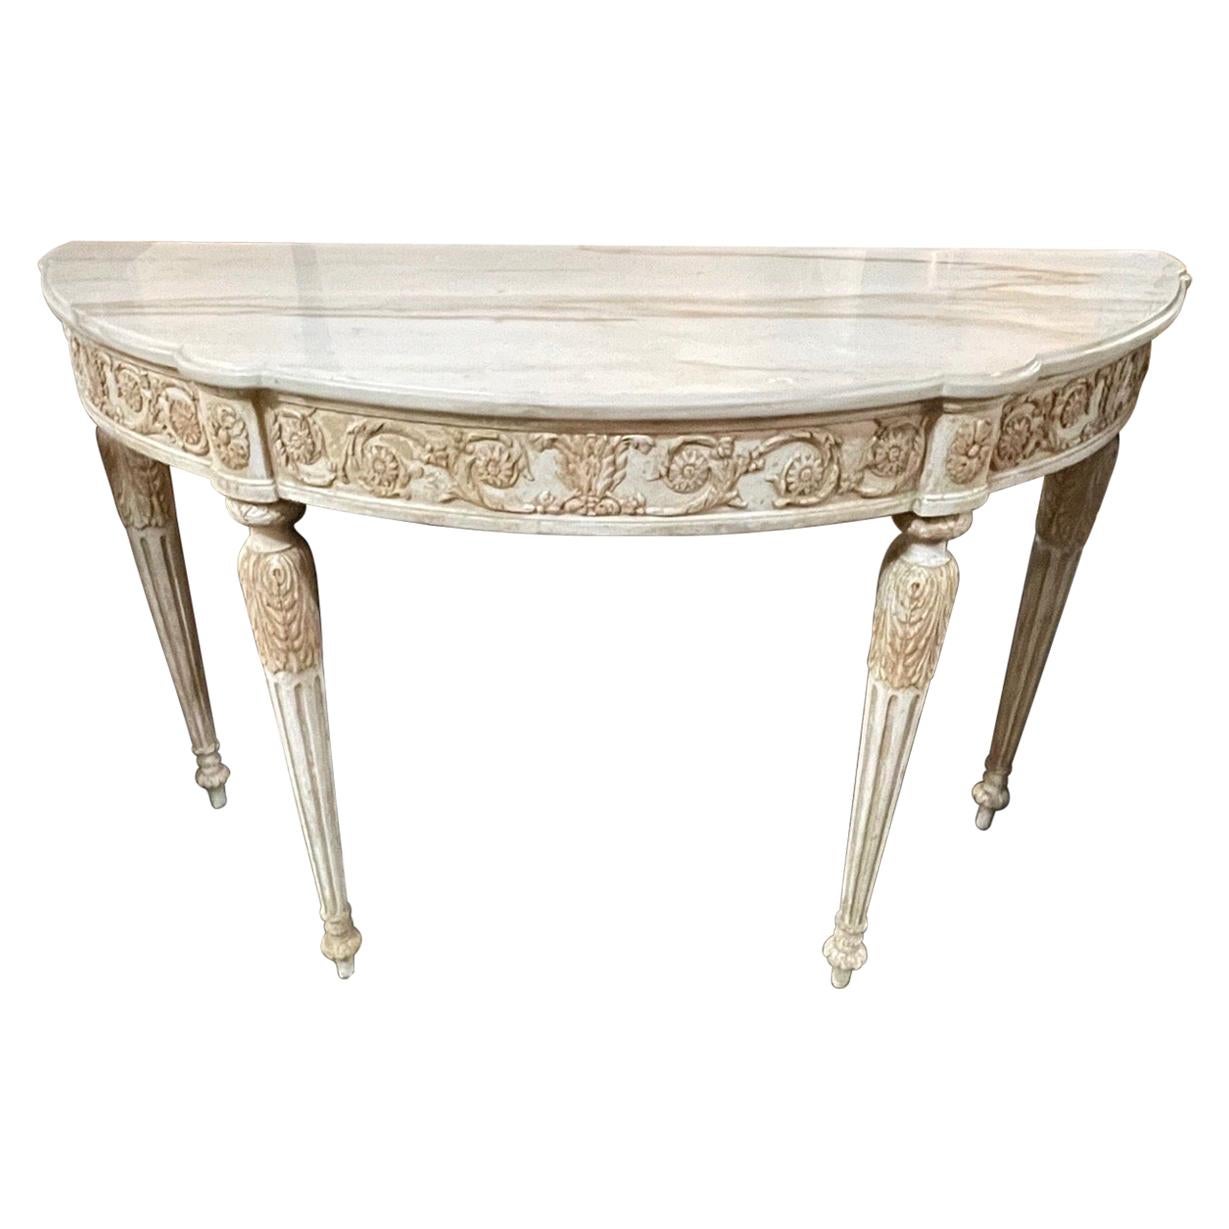 Superb French Louis XVI carved and painted console with onyx top. The carvings on this piece are truly exceptional and the patina is beautiful as well. Stunning!!